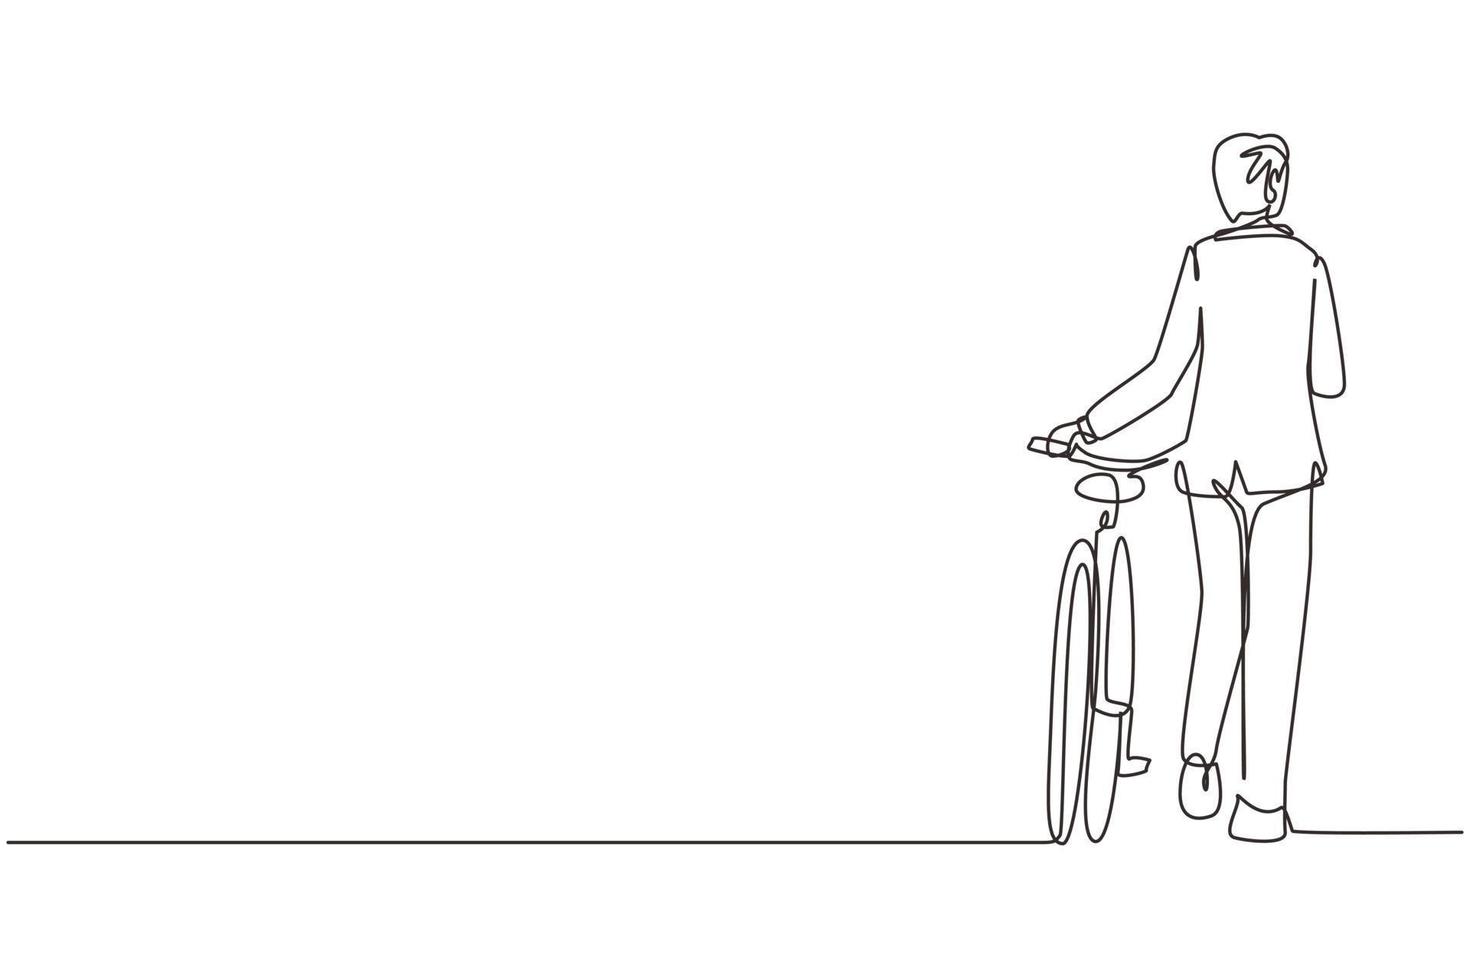 Single continuous line drawing back view walking young male wearing suit with bicycle. Man take a walk with bicycle at city road. Healthy lifestyle of urban people. One line draw graphic design vector